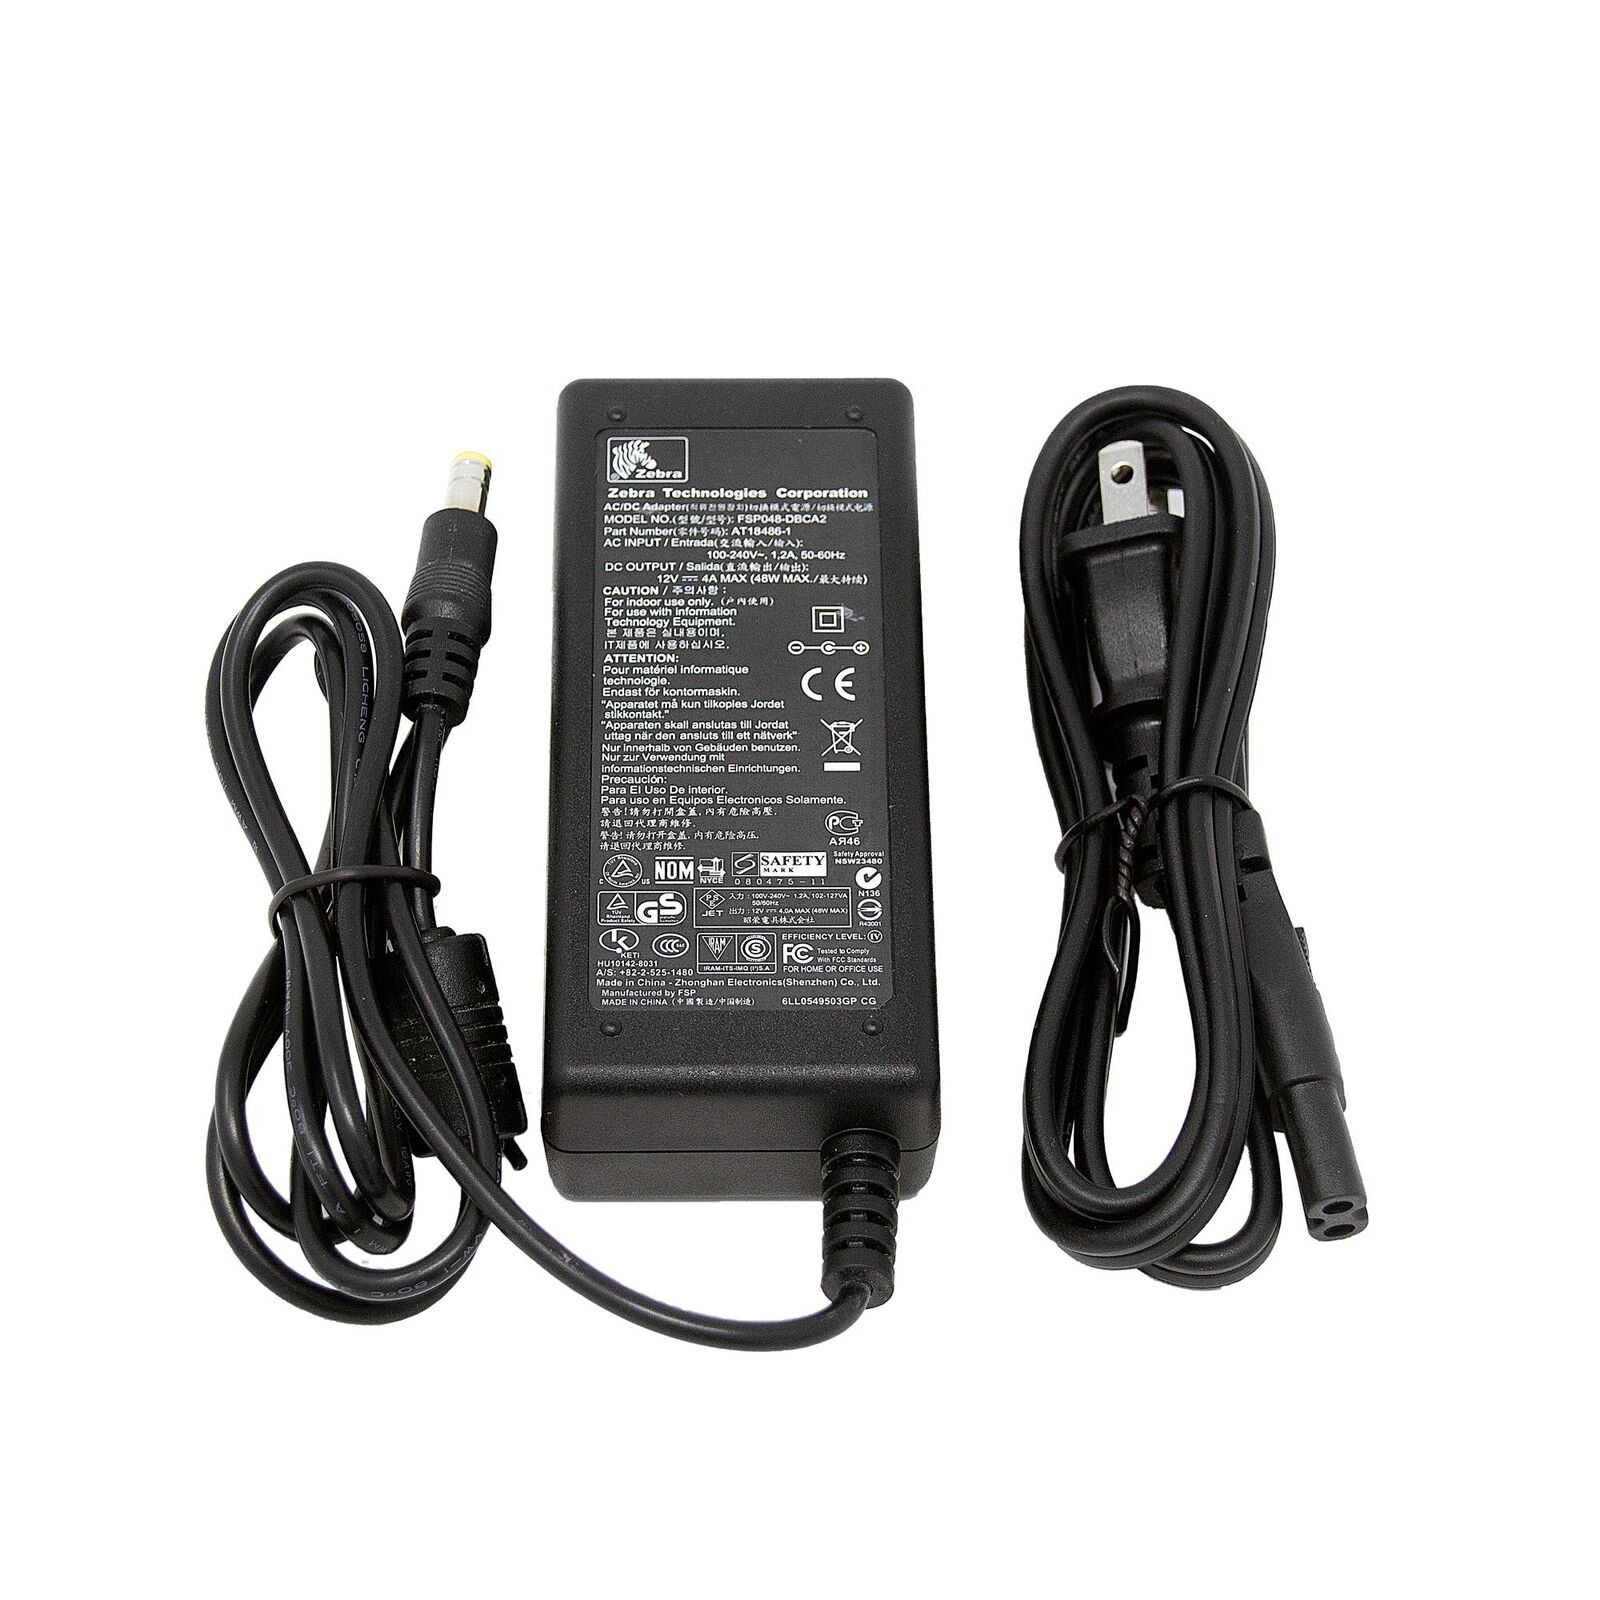 ZEBRA  AT18486-1 Mobile Printers 48W Genuine AC Power Adapter Charger